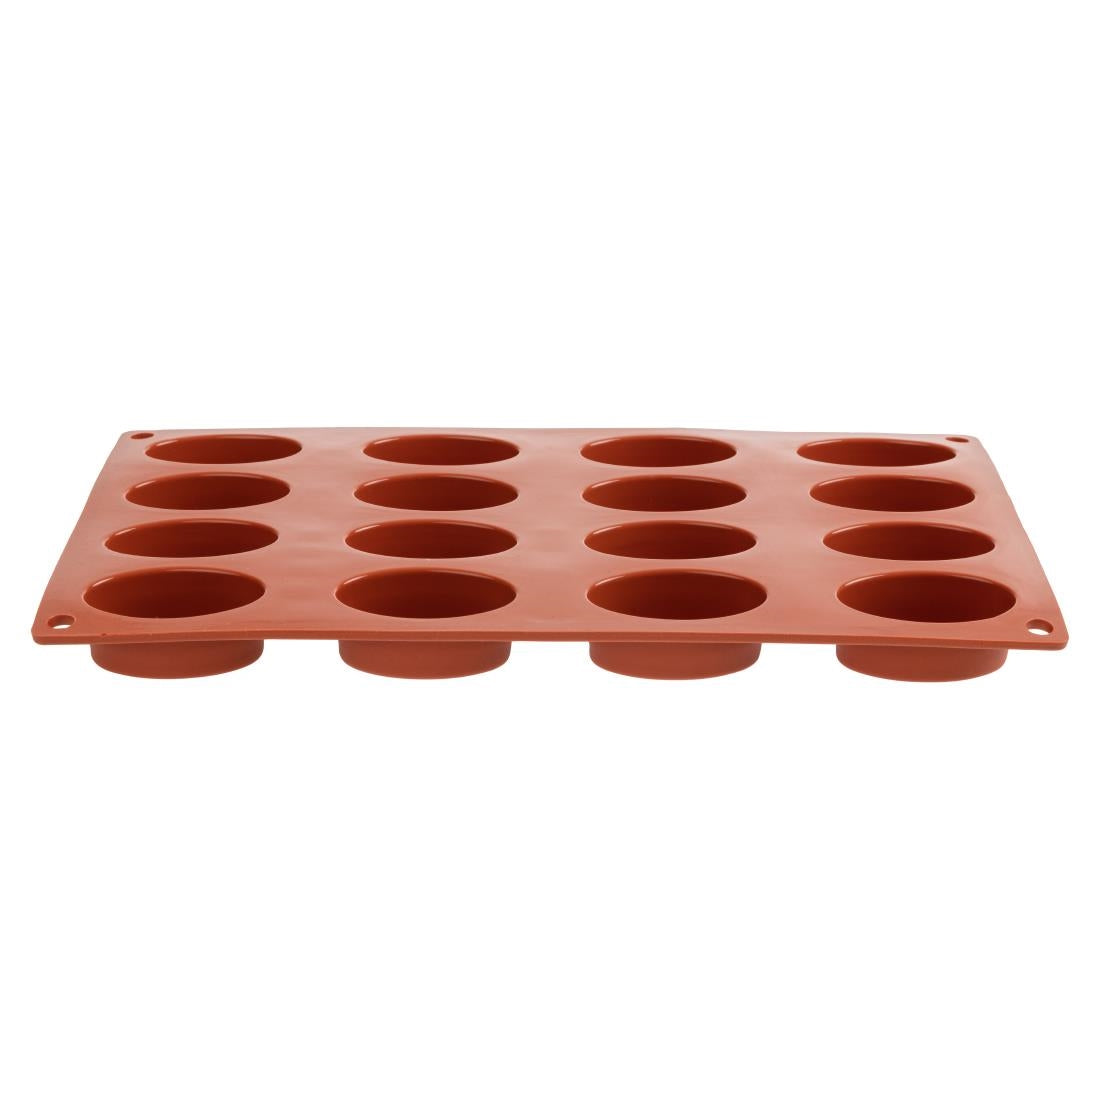 Pavoni Formaflex Silicone Oval Mould 16 Cup